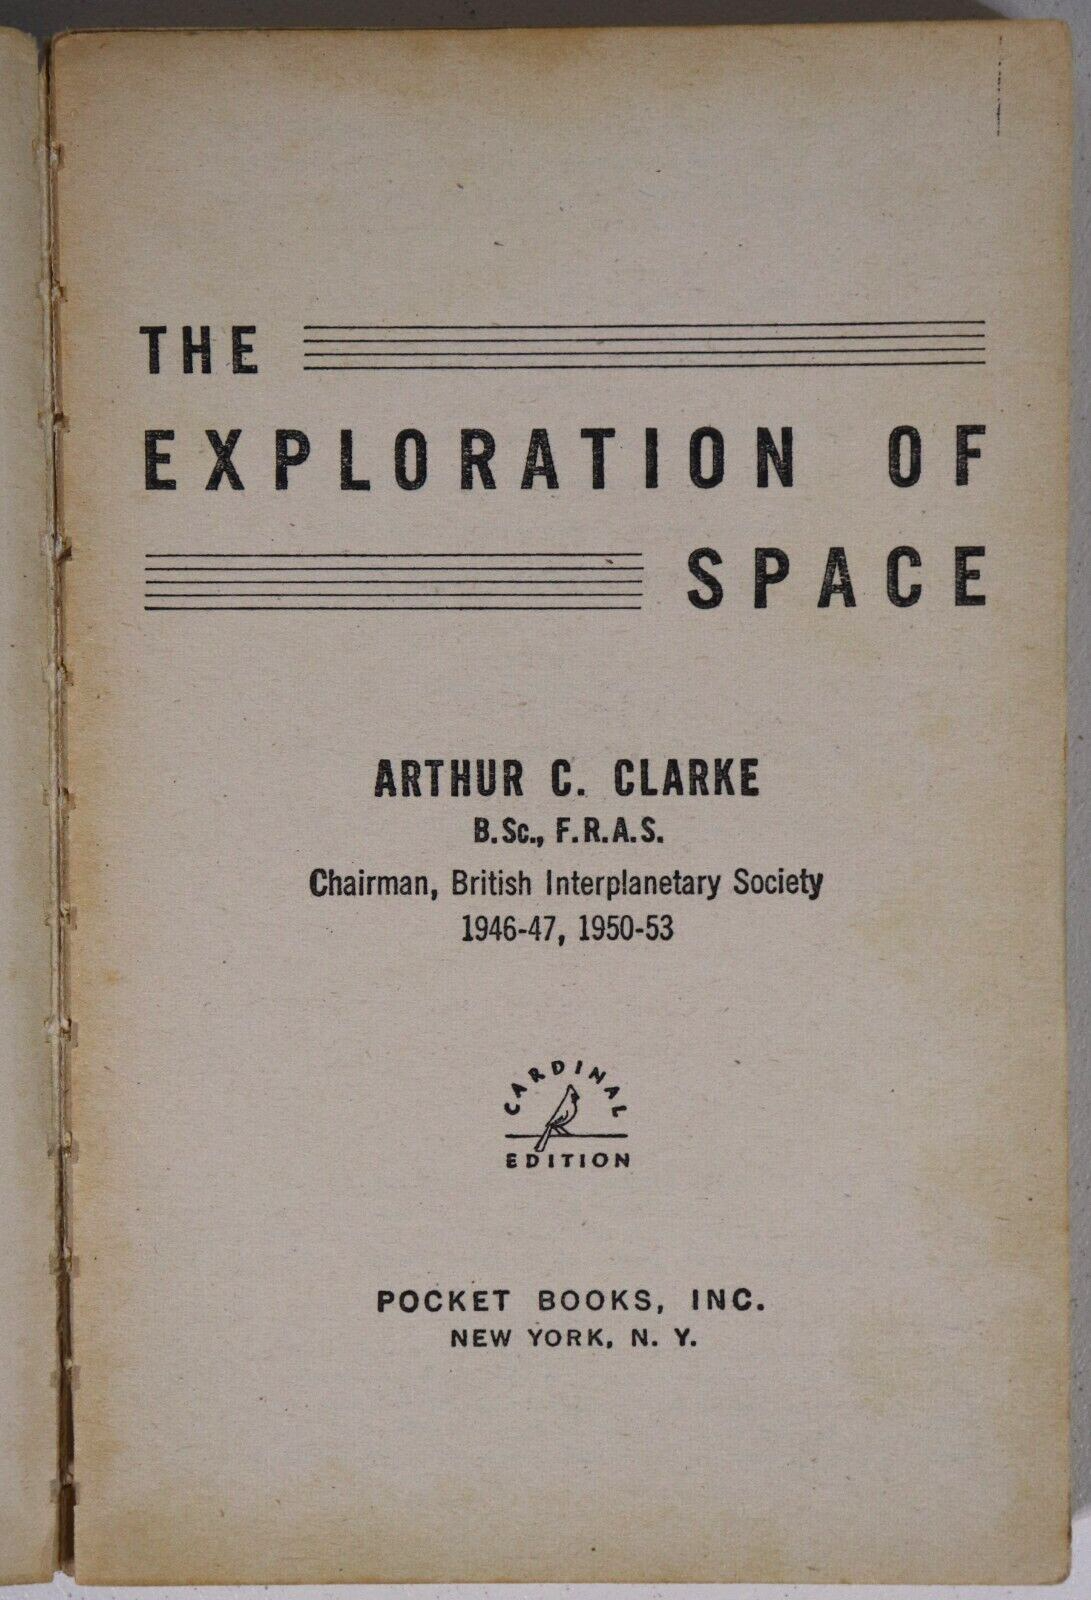 The Exploration Of Space by Arthur C. Clarke - 1954 - Vintage Space Science Book - 0